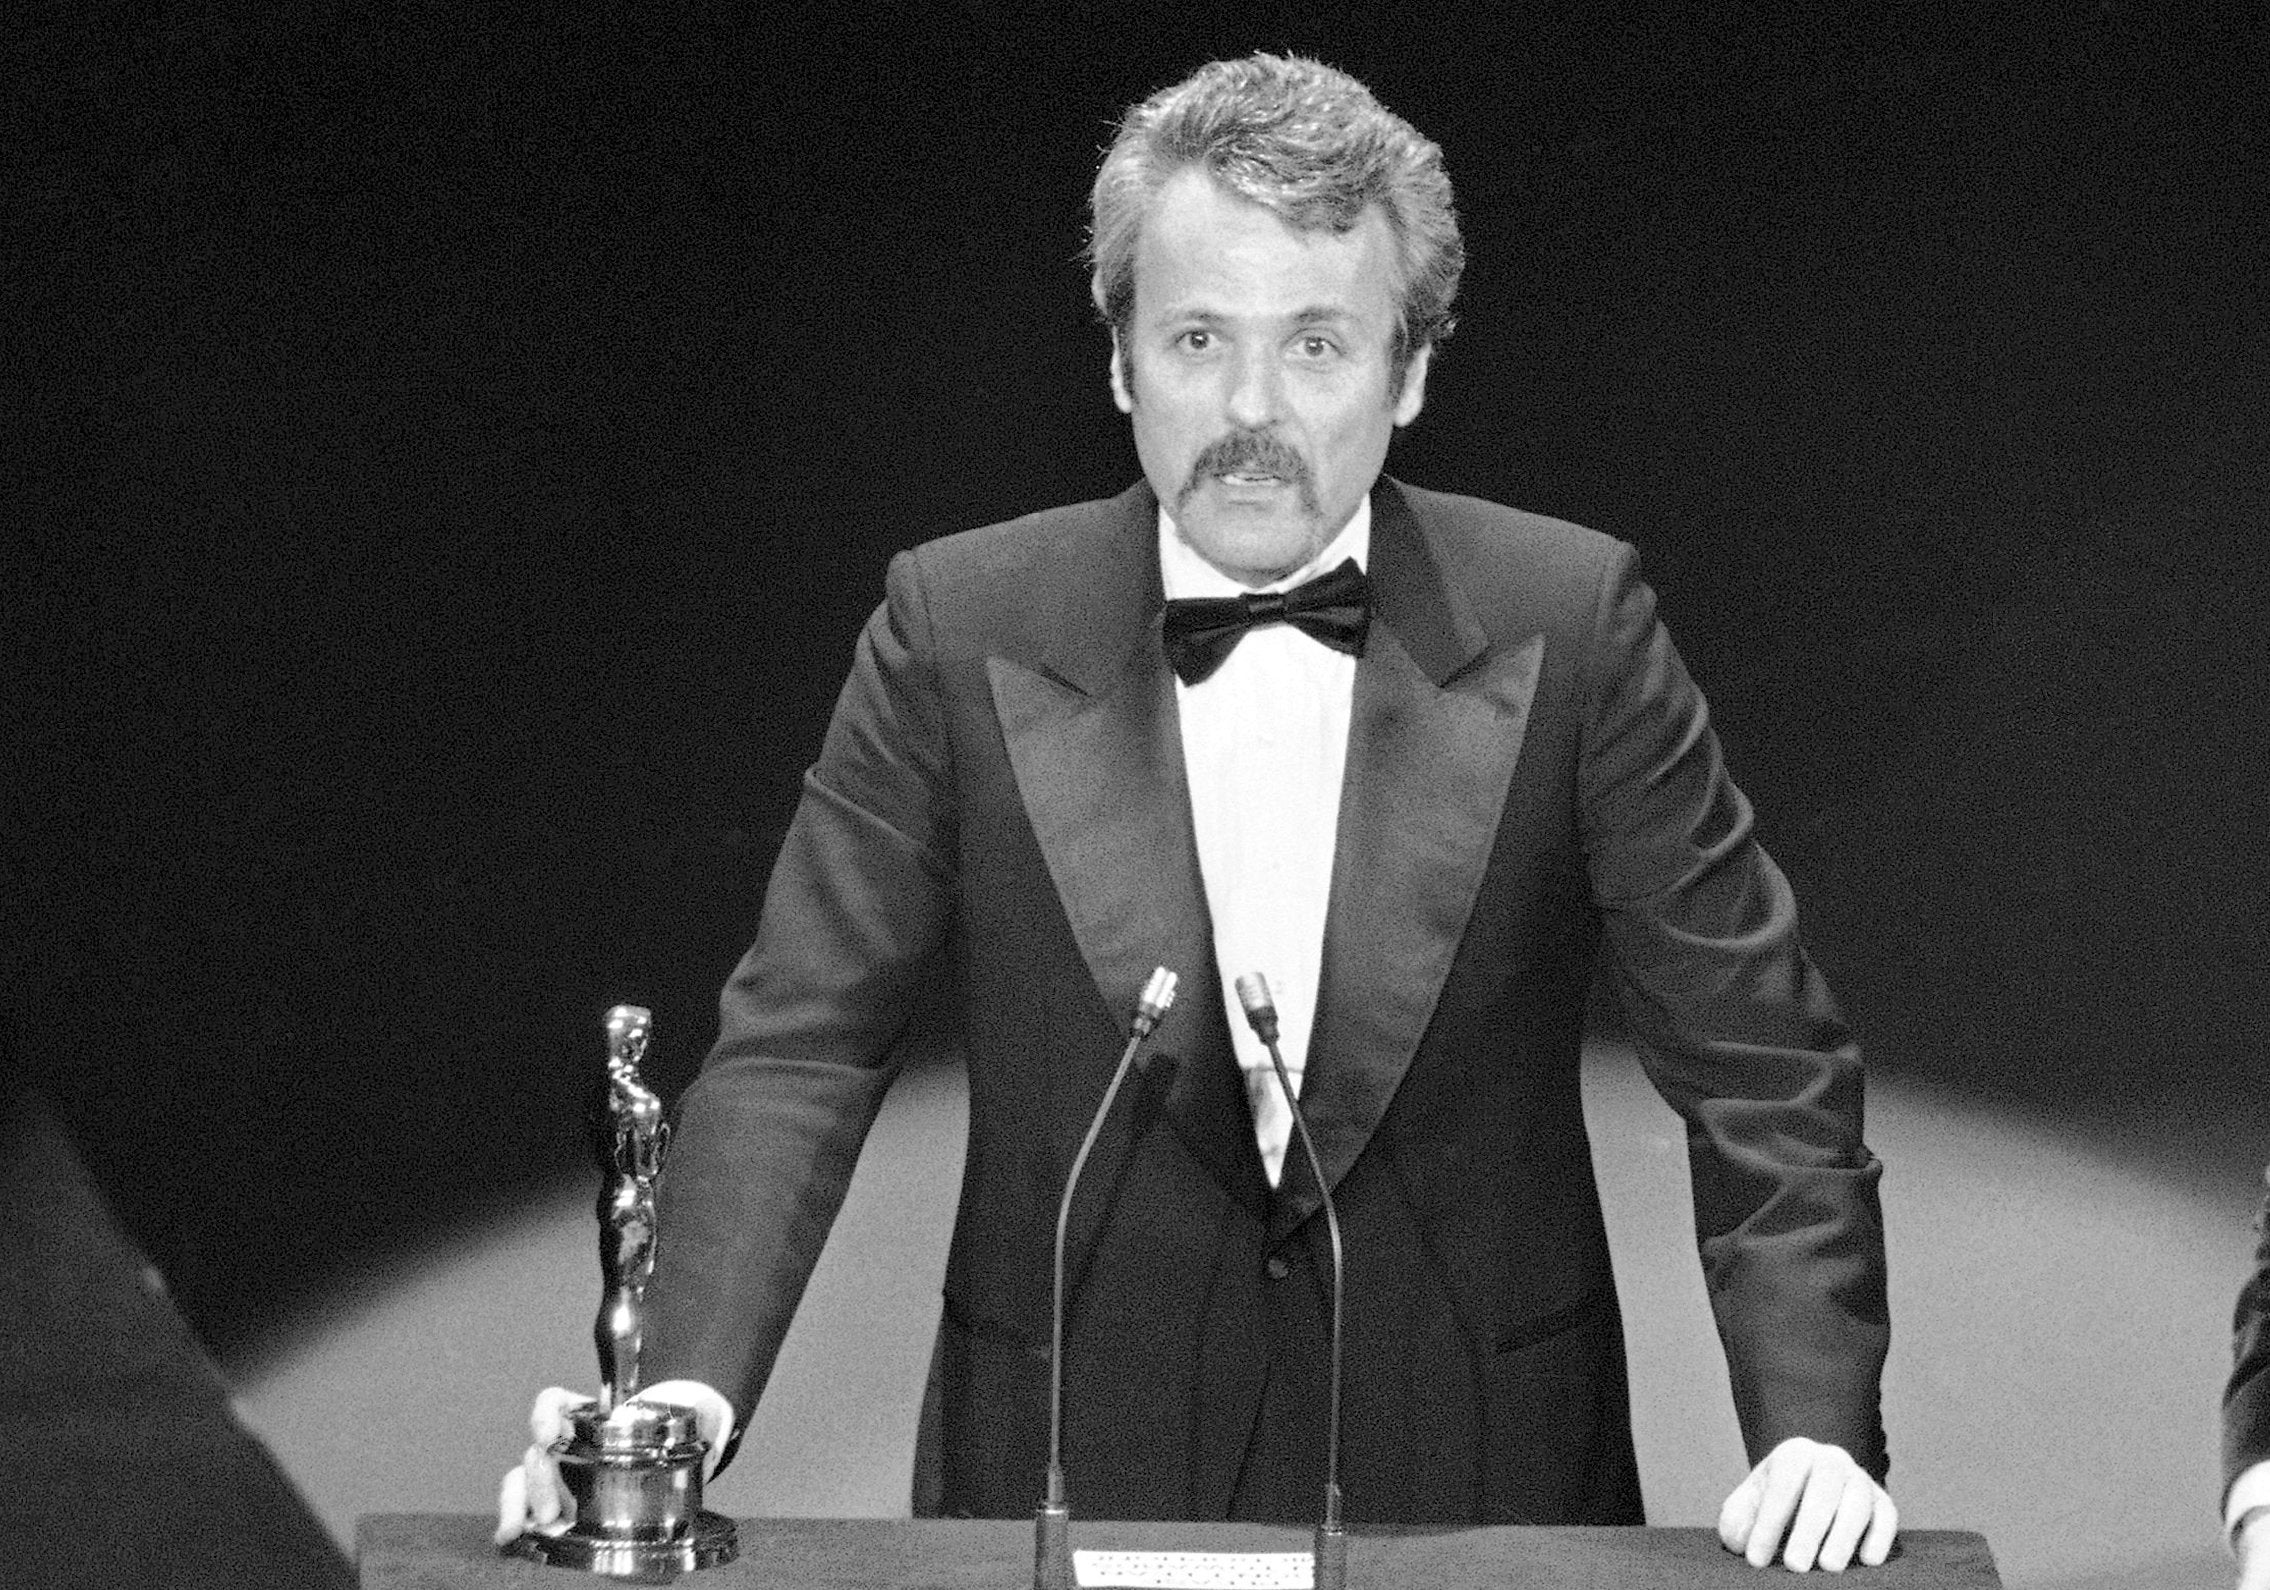 Goldman accepts his Oscar for ‘All the President’s Men’ in 1977